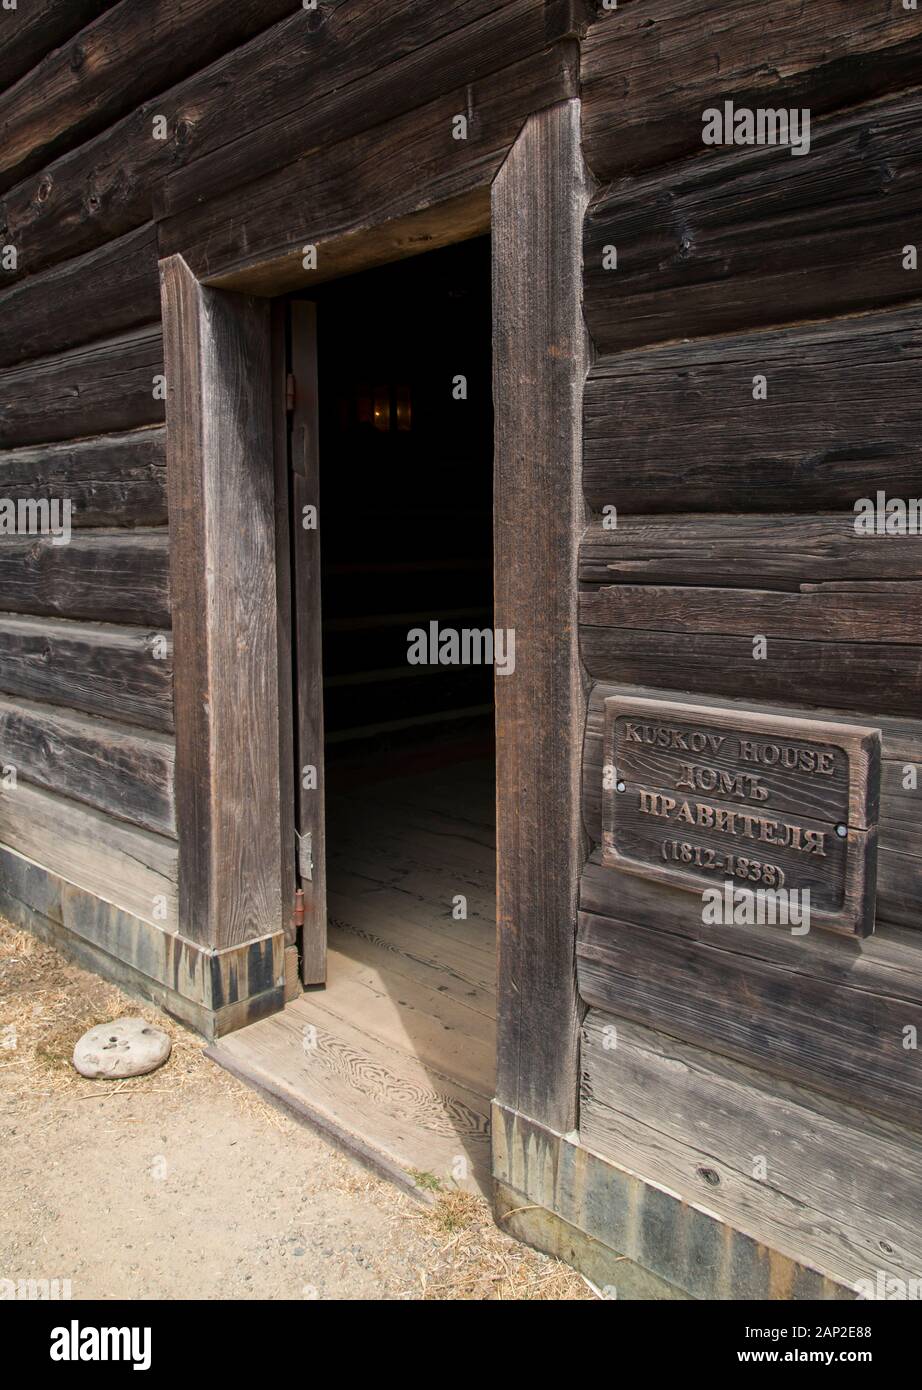 Building details of wooden hand built structures at Fort Ross State Historic Park on the Sonoma County coast of California Stock Photo